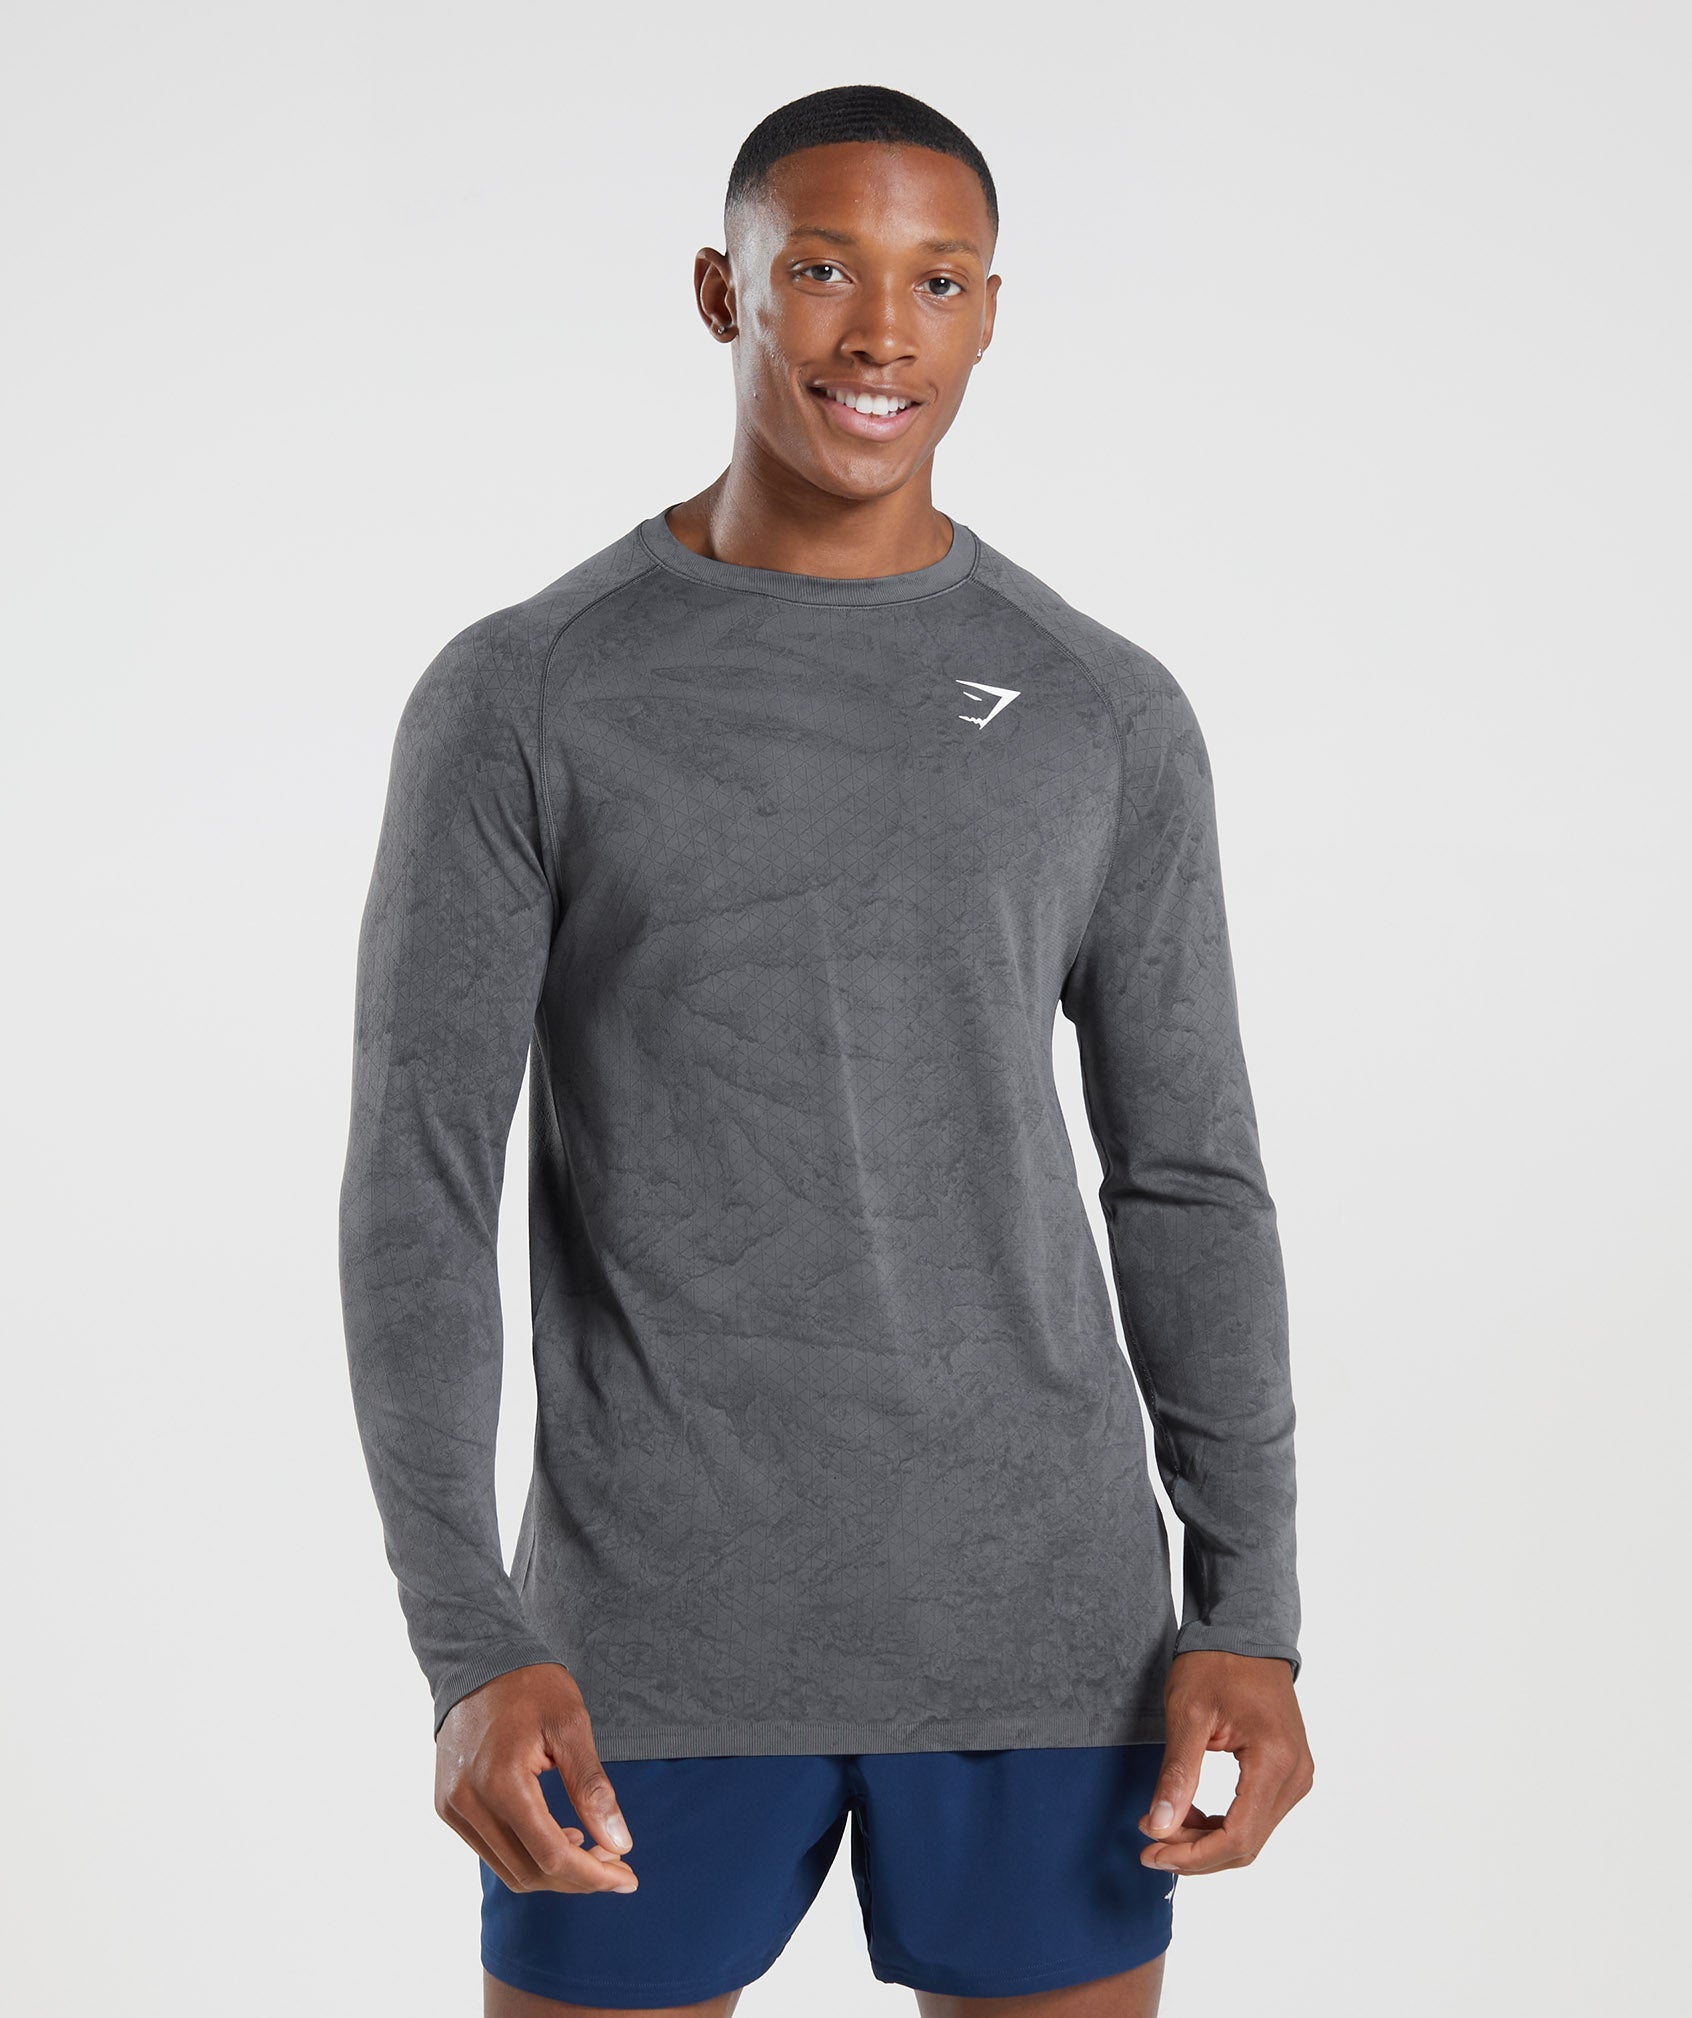 Geo Seamless Long Sleeve T-Shirt in Charcoal Grey/Black - view 2